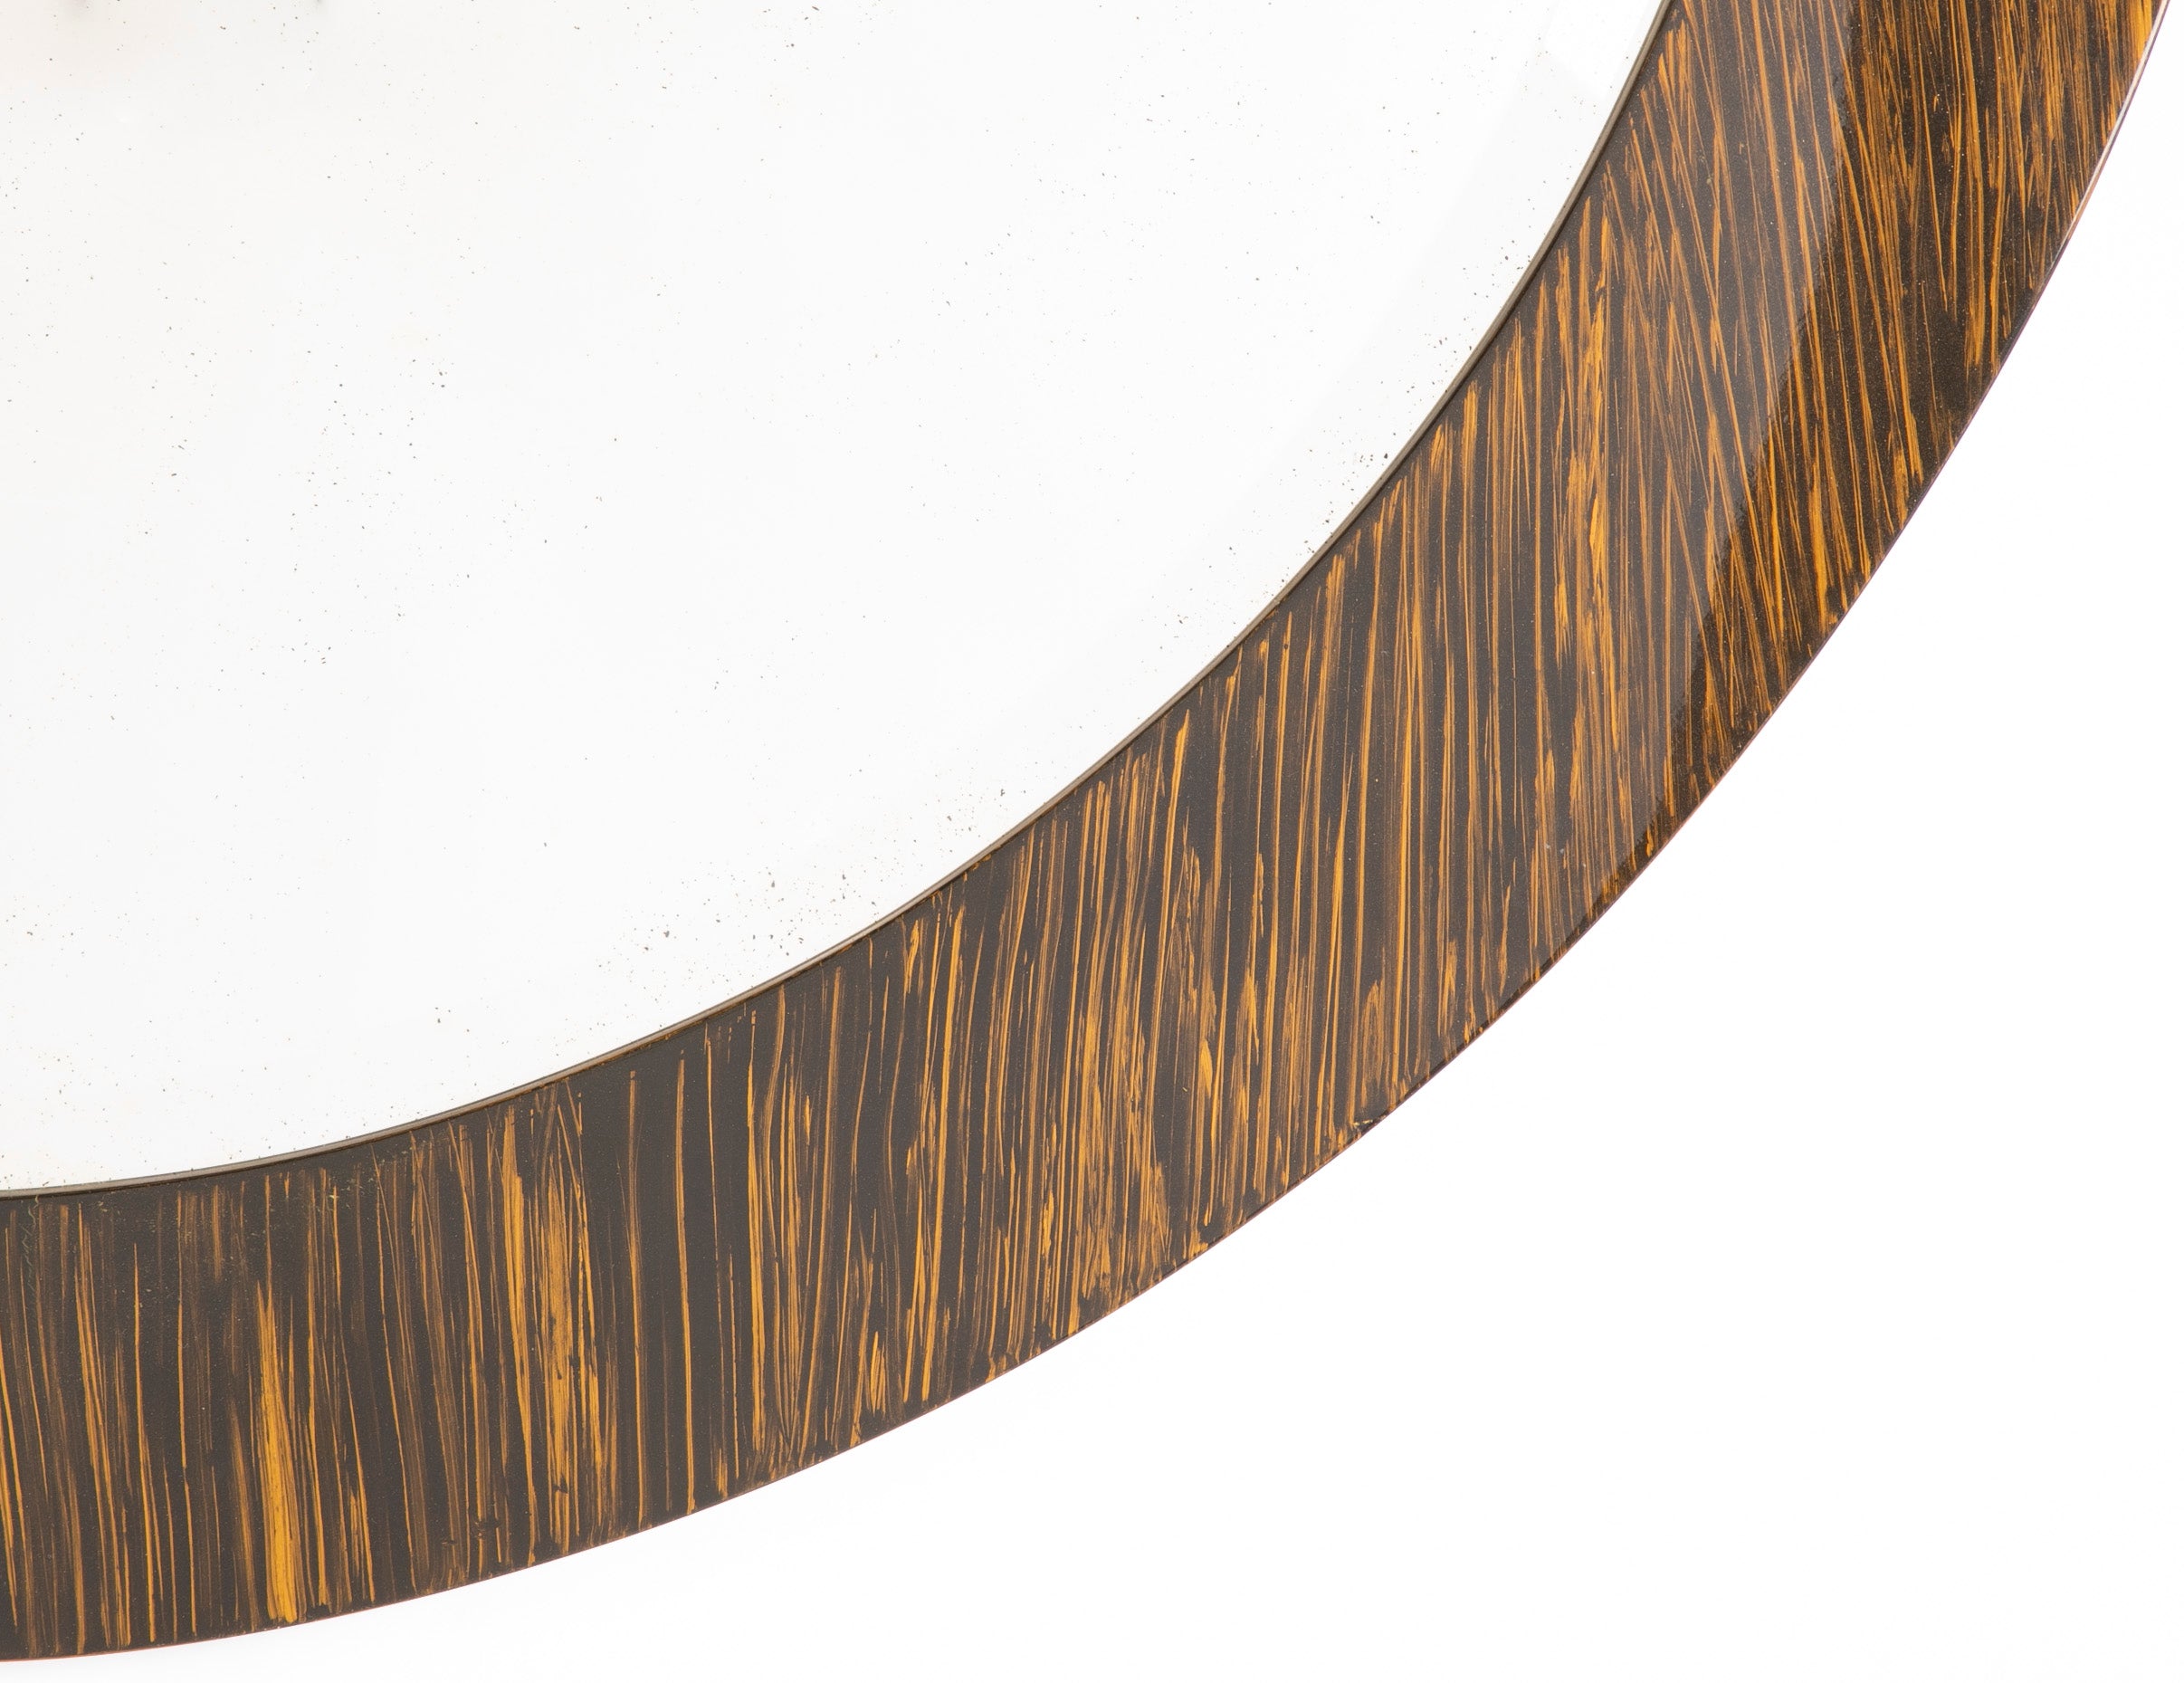 Karl Springer Style Round Mirror With Faux Tigers Eye Lacquered Finish